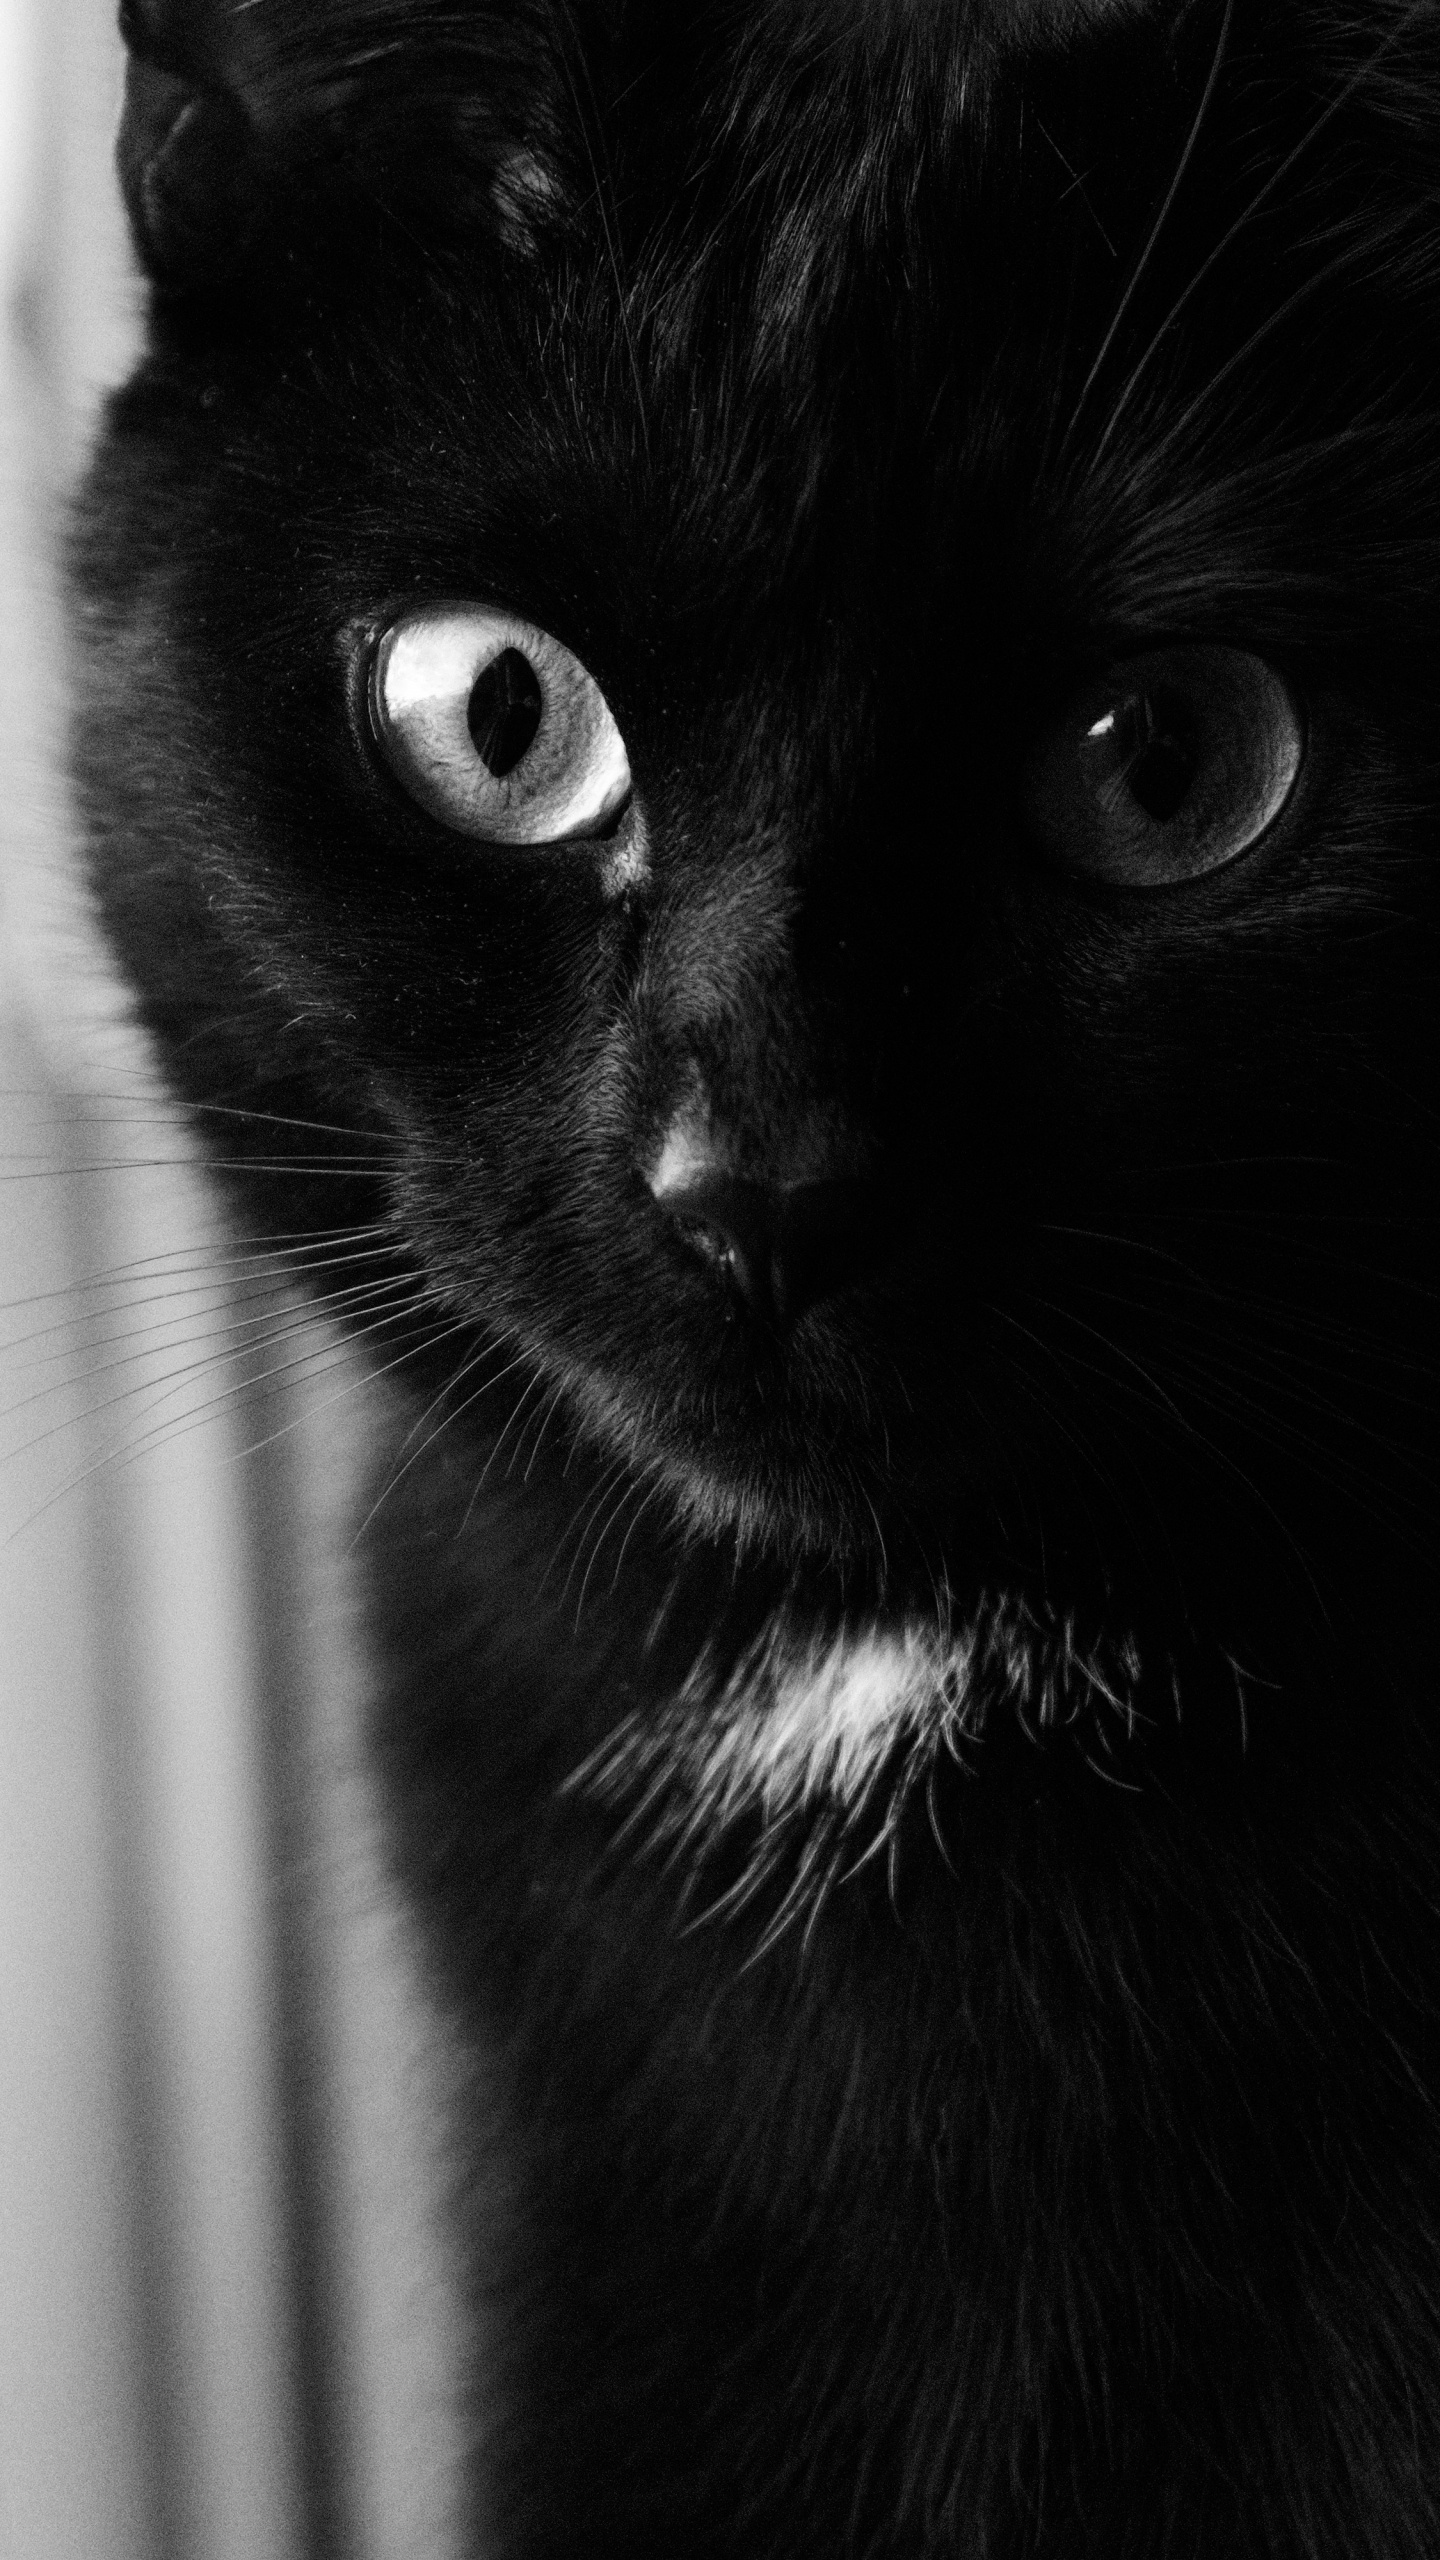 Black Cat in Grayscale Photography. Wallpaper in 1440x2560 Resolution